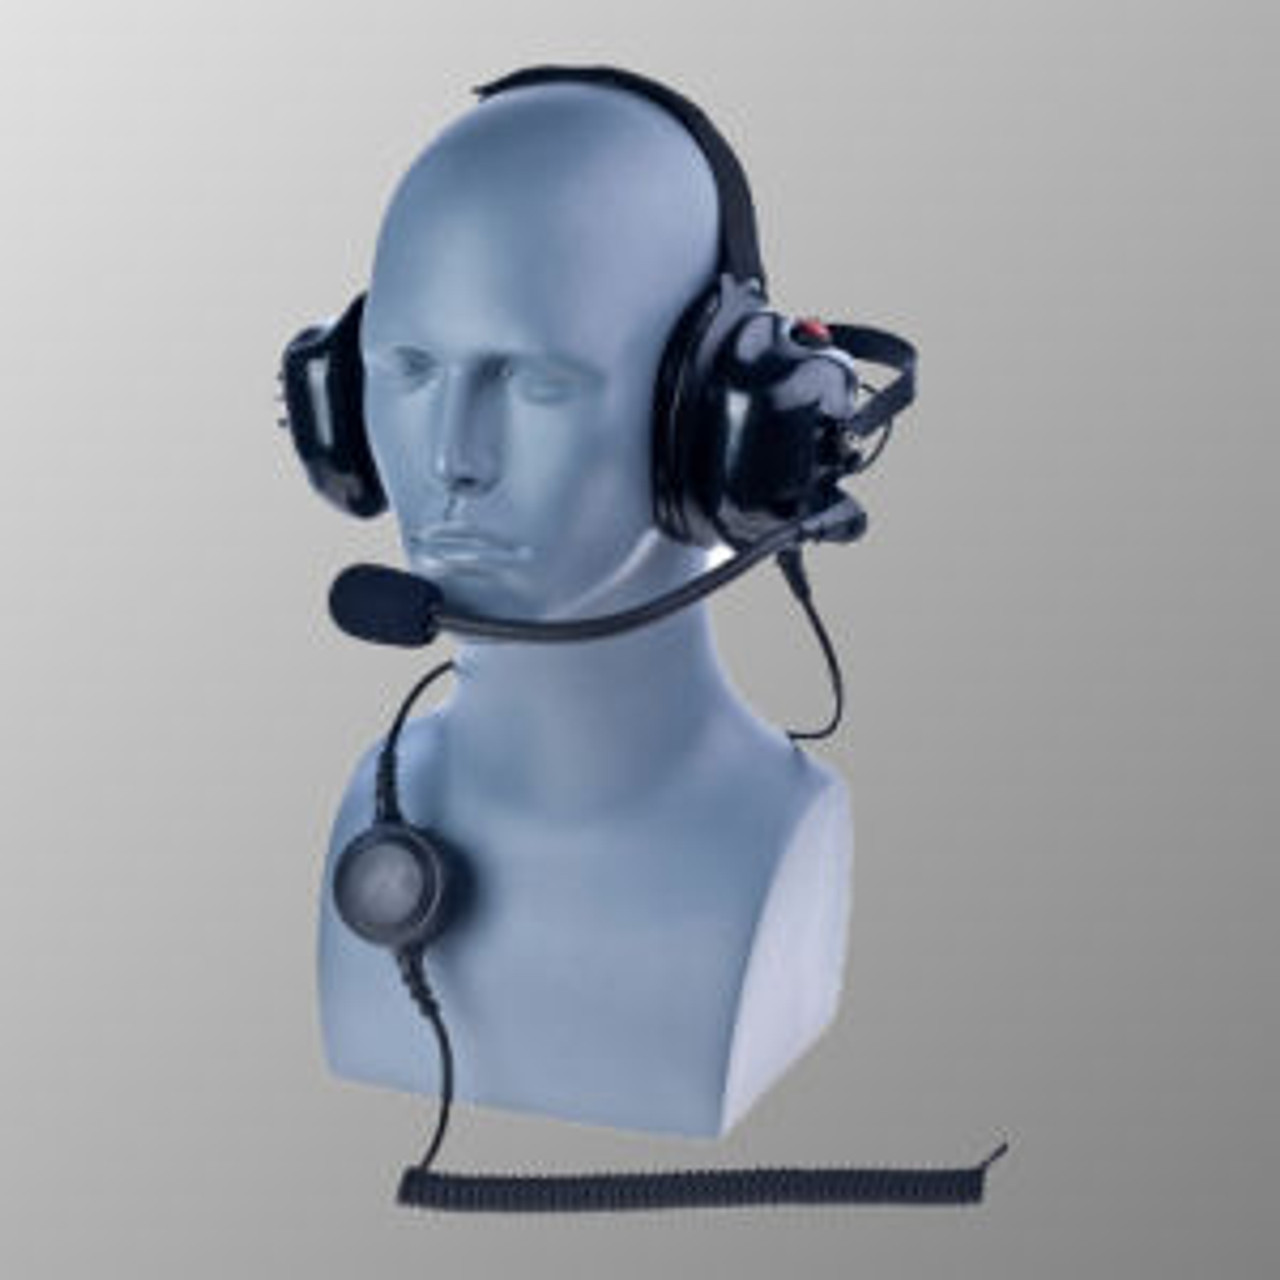 Motorola XPR7550e Noise Canceling Behind The Head Double Muff Headset